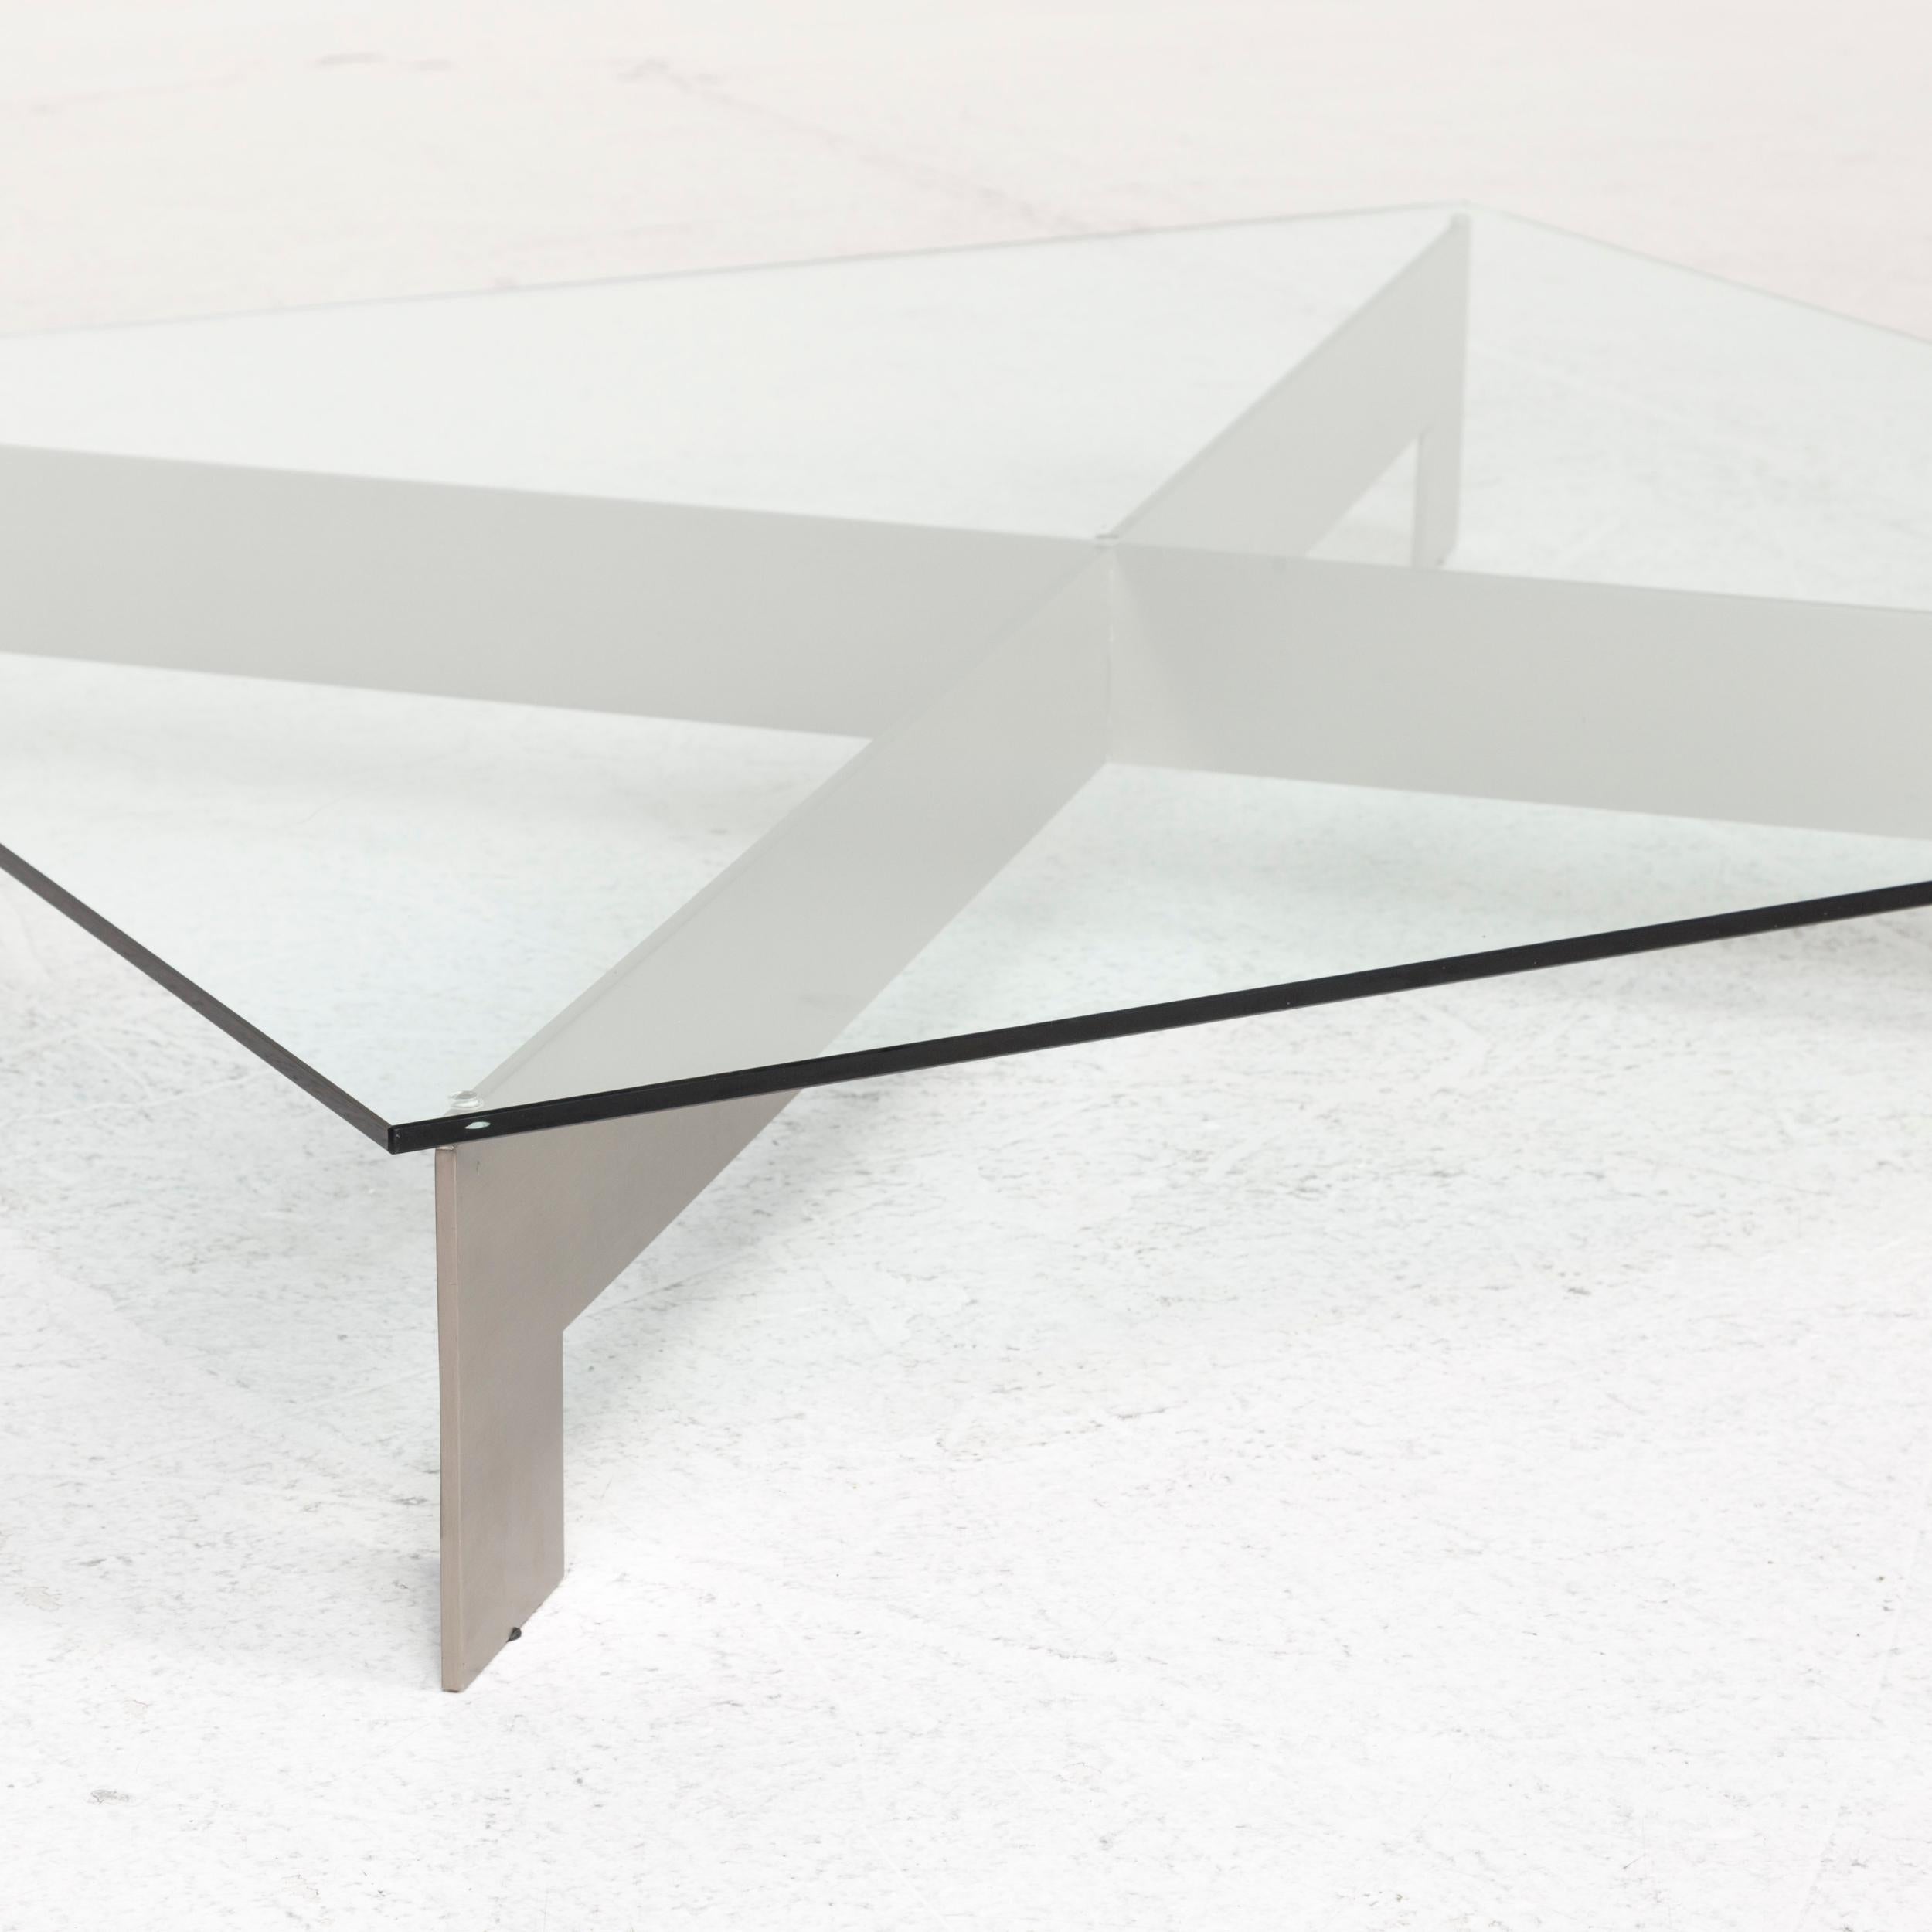 We bring to you an orsenigo glass coffee table square table.


 Product measurements in centimeters:
 

 Depth 120
 Width 120
 Height 21.





 